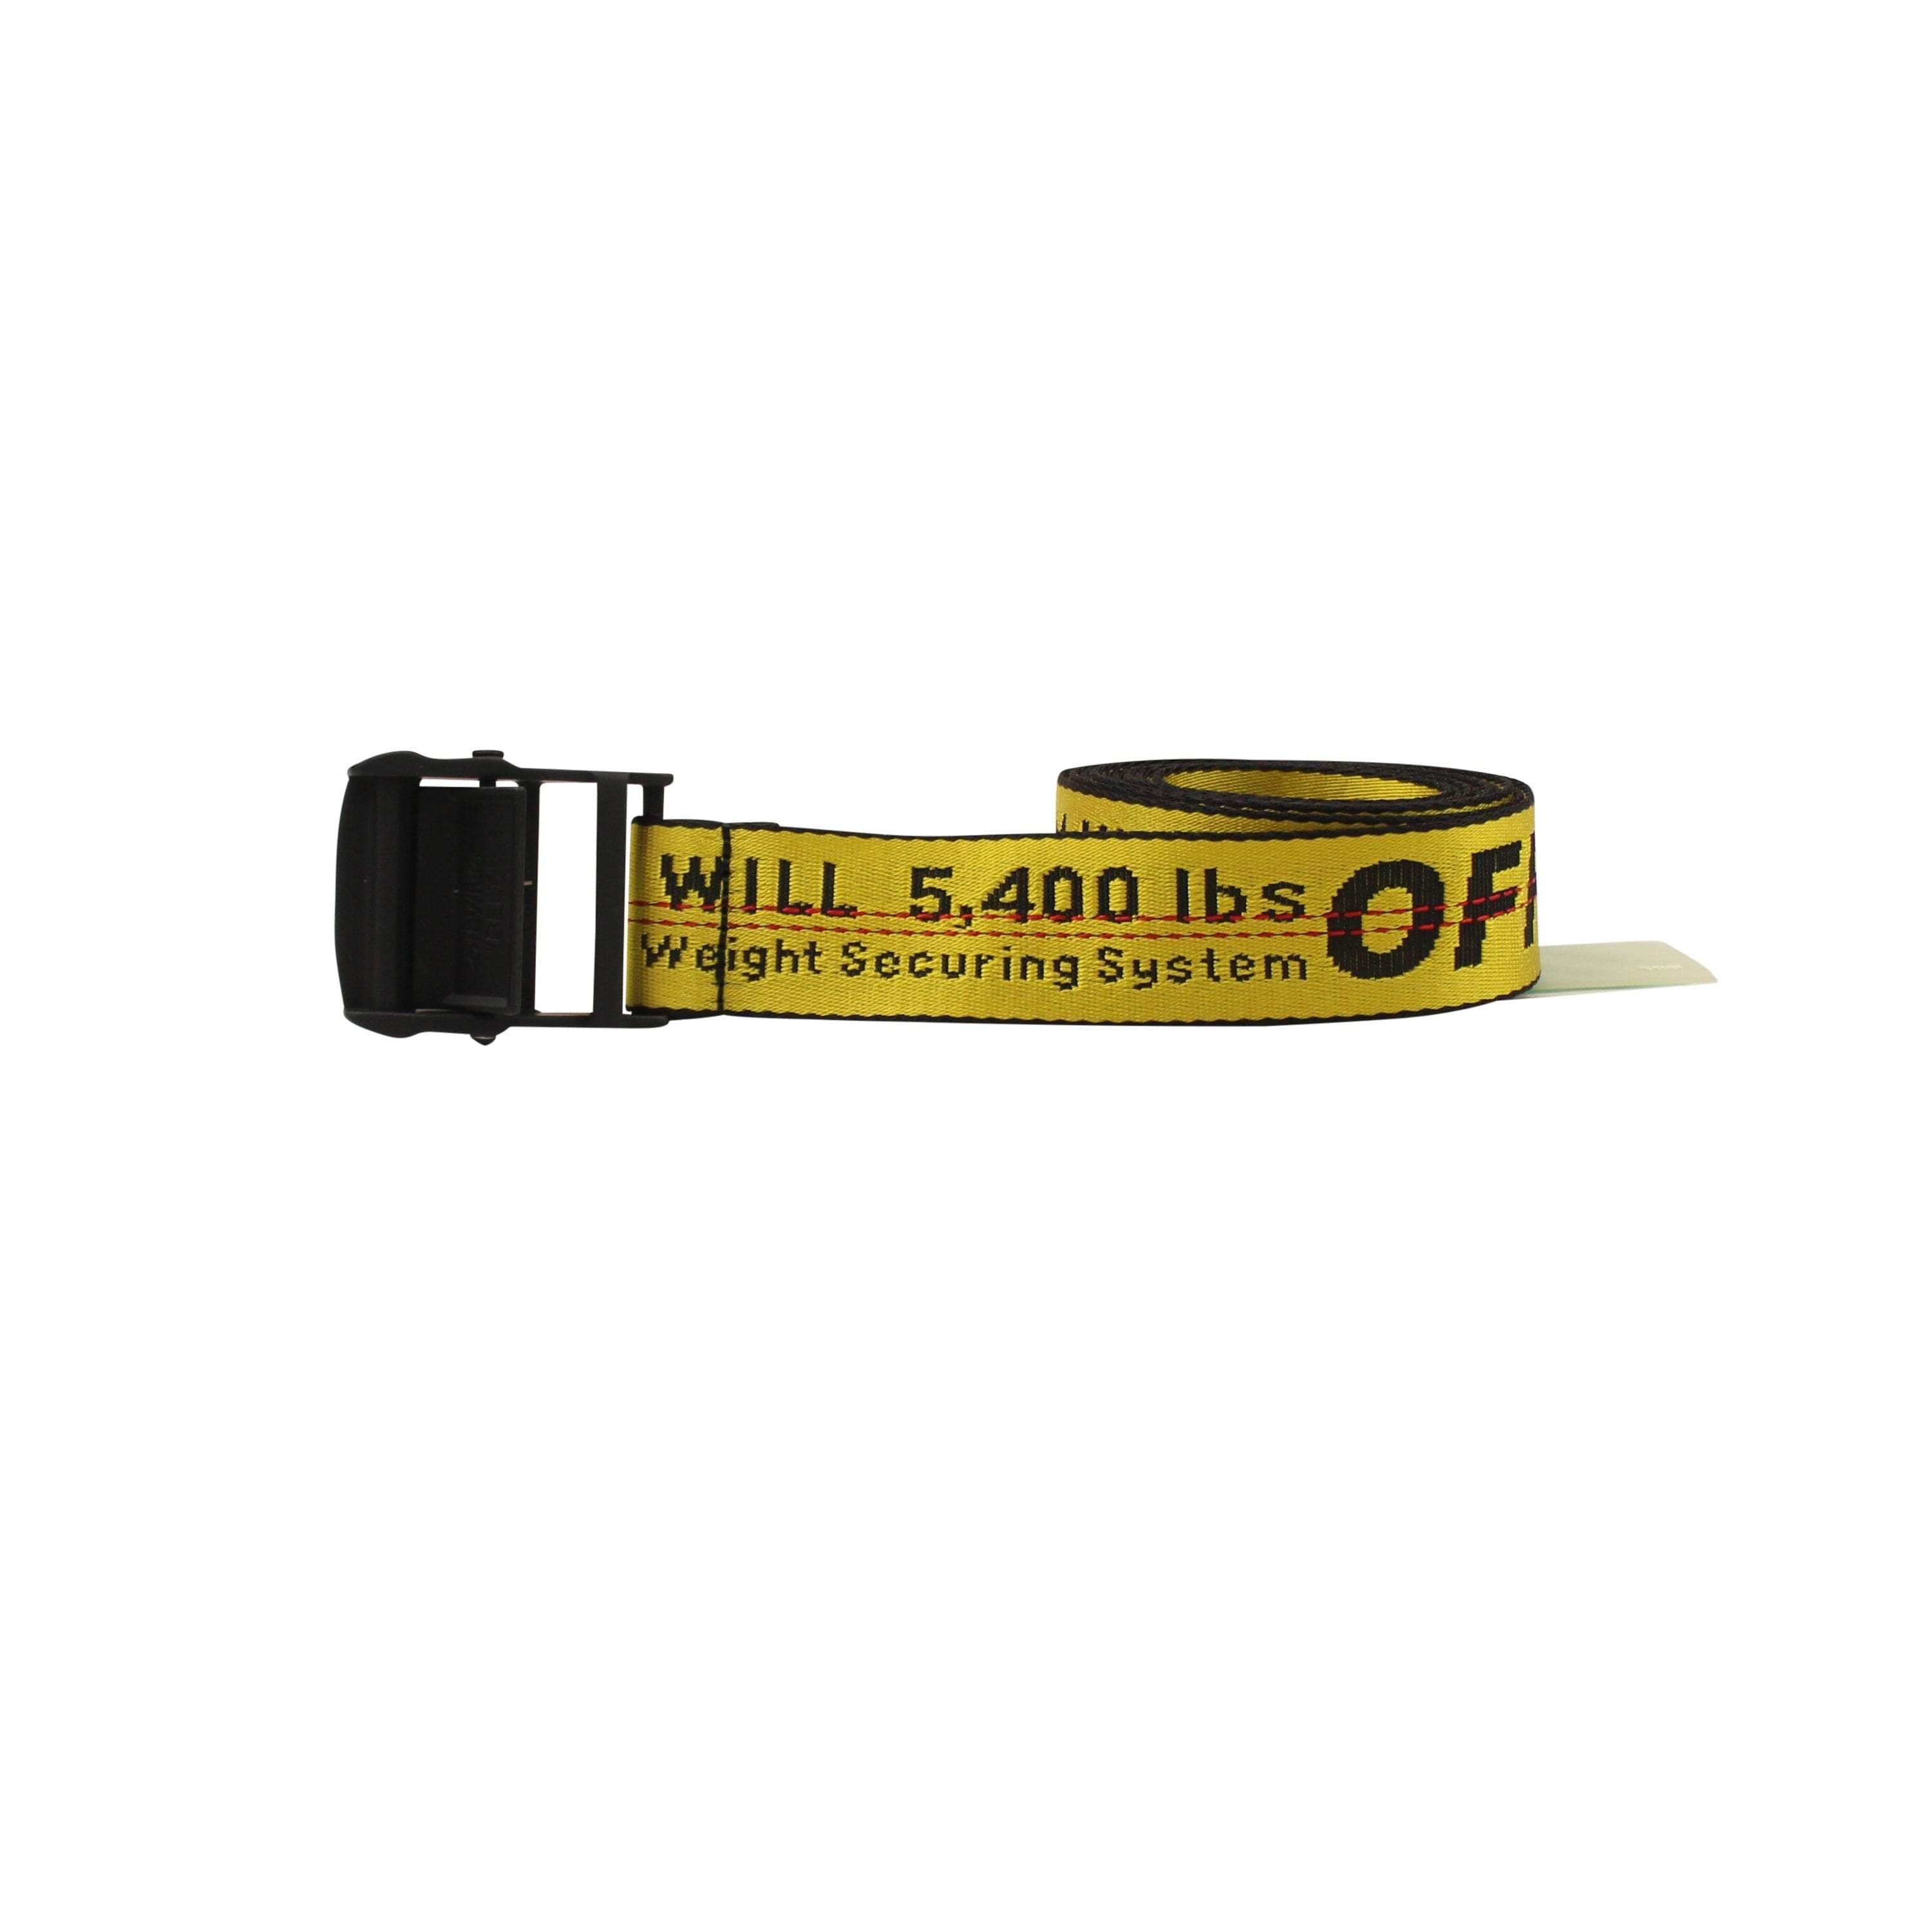 OFF-WHITE c/o VIRGIL ABLOH couponcollection, gender-womens, main-accessories, off-white-c-o-virgil-abloh, stadiumgoods, under-250 OS Yellow Classic Industrial Belt OFW-XACC-0110/OS OFW-XACC-0110/OS